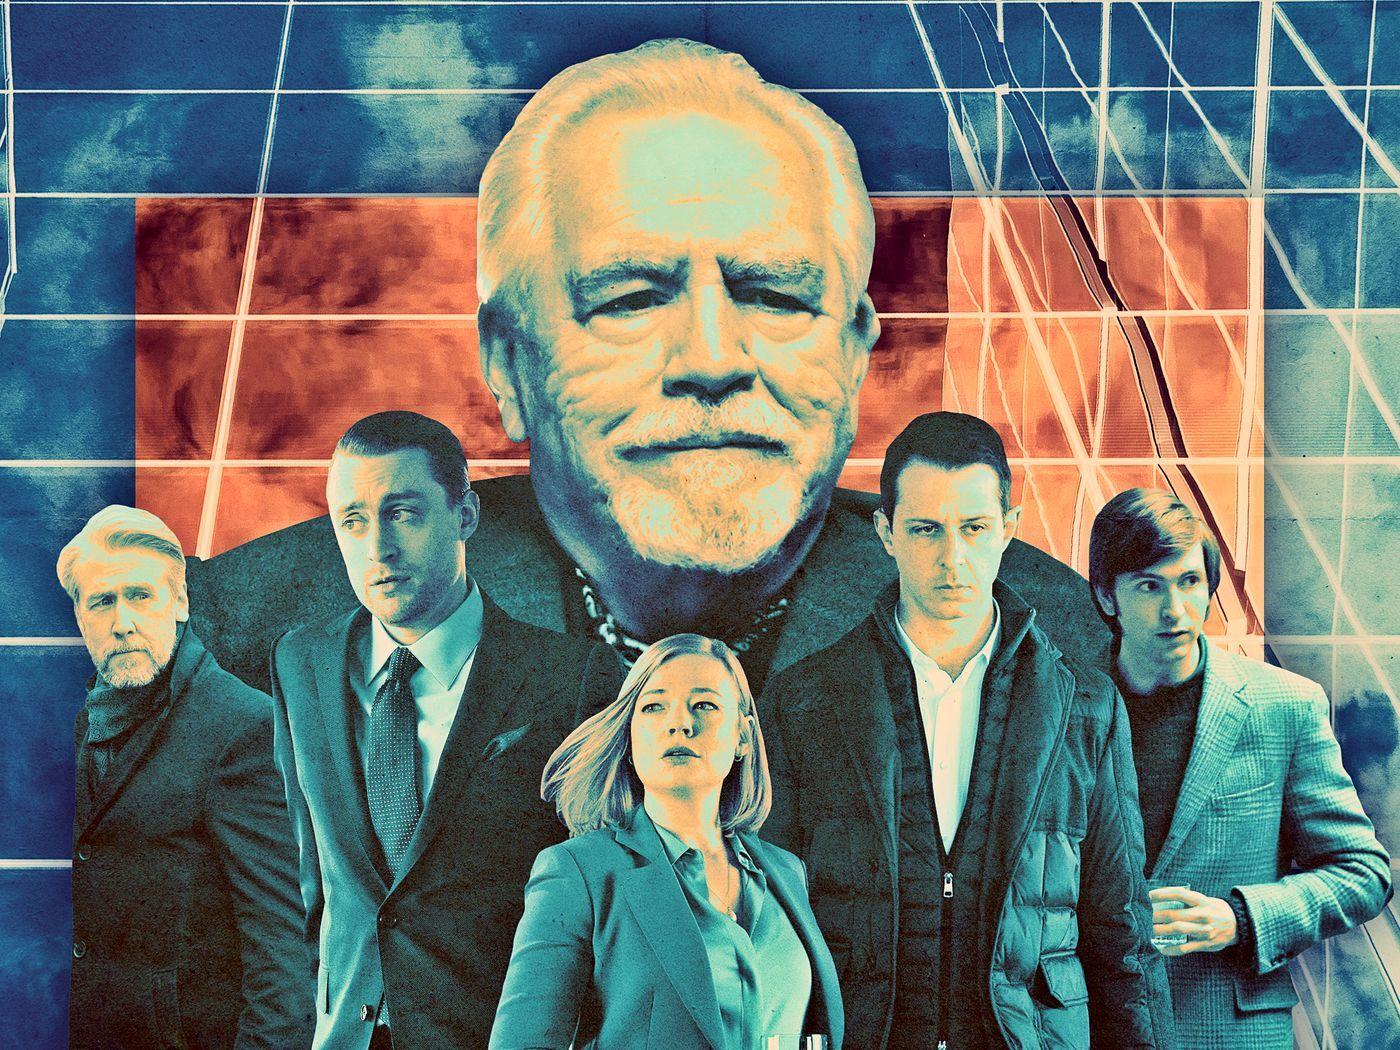 Succession HBO Wallpaper Free Succession HBO